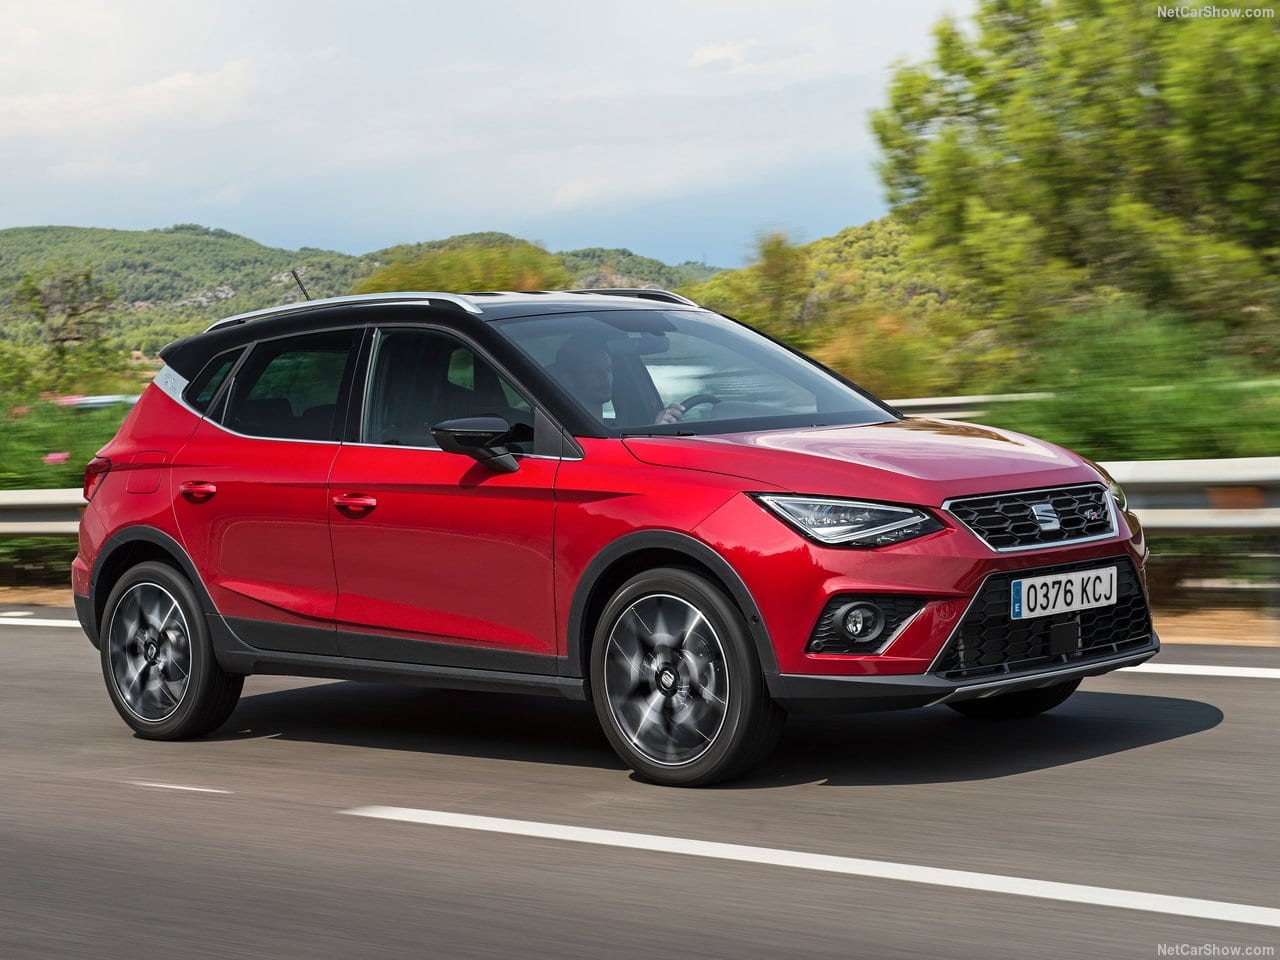 The Seat Arona TGI offers enough space for five people and their luggage.